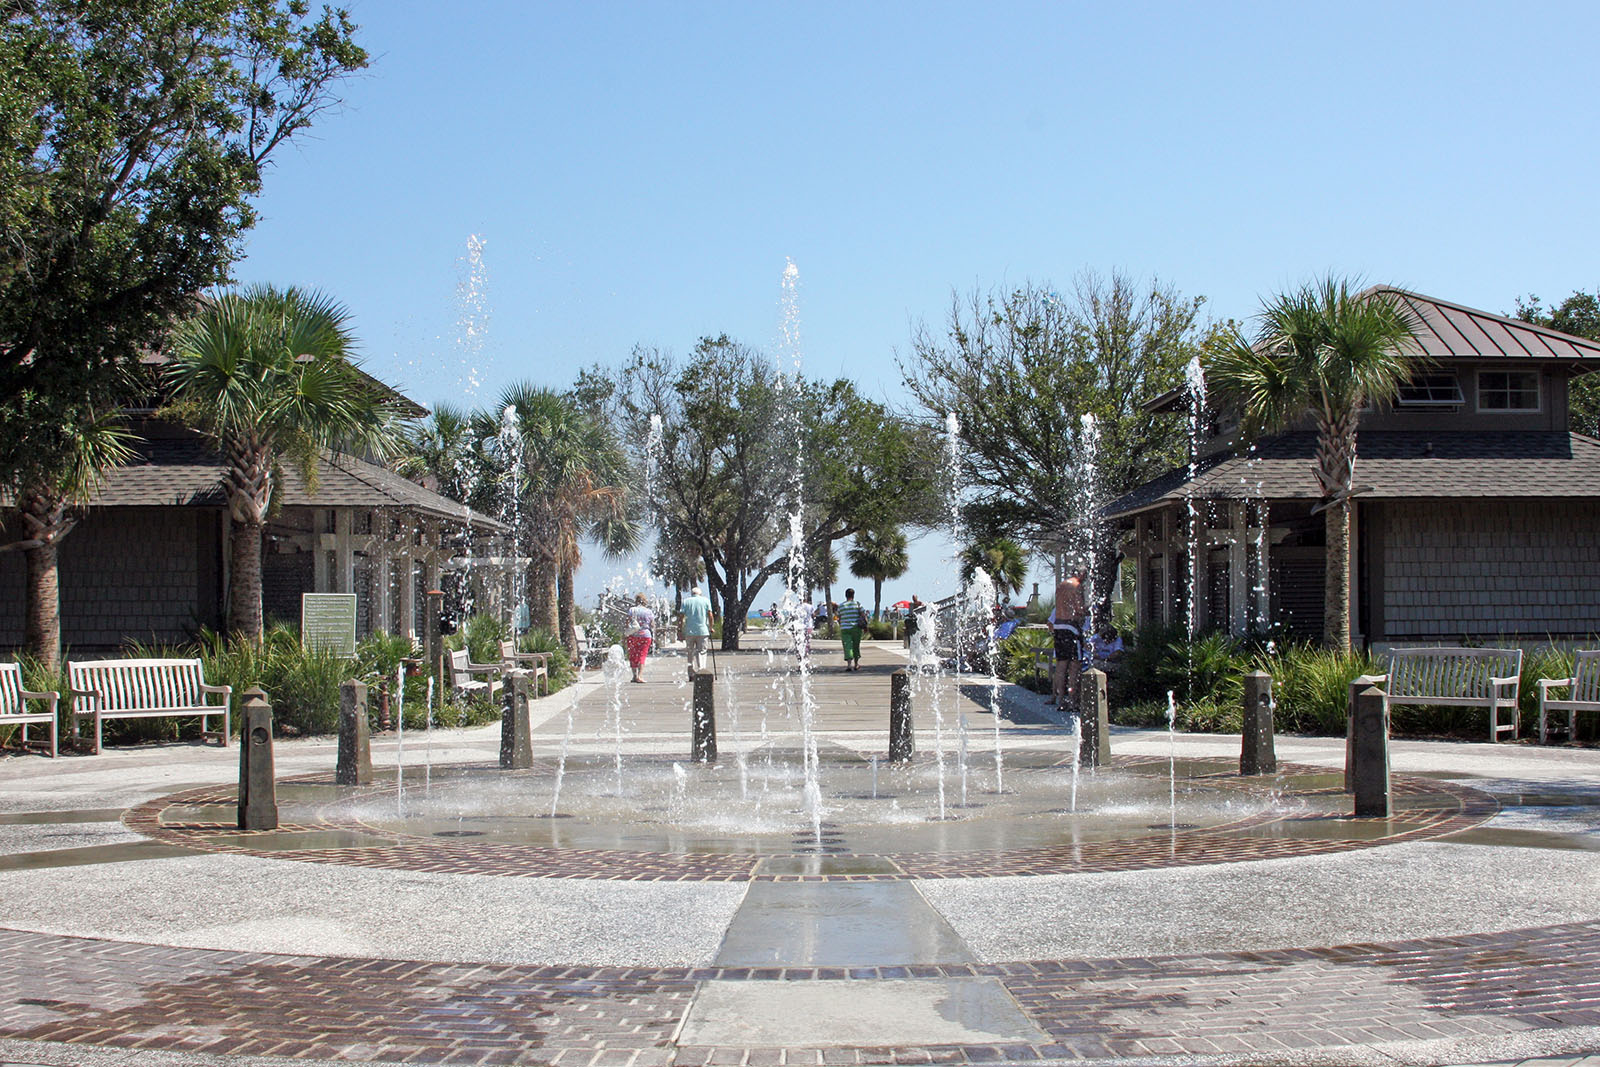 Colingy Beach Park Fountain and Boardwalk